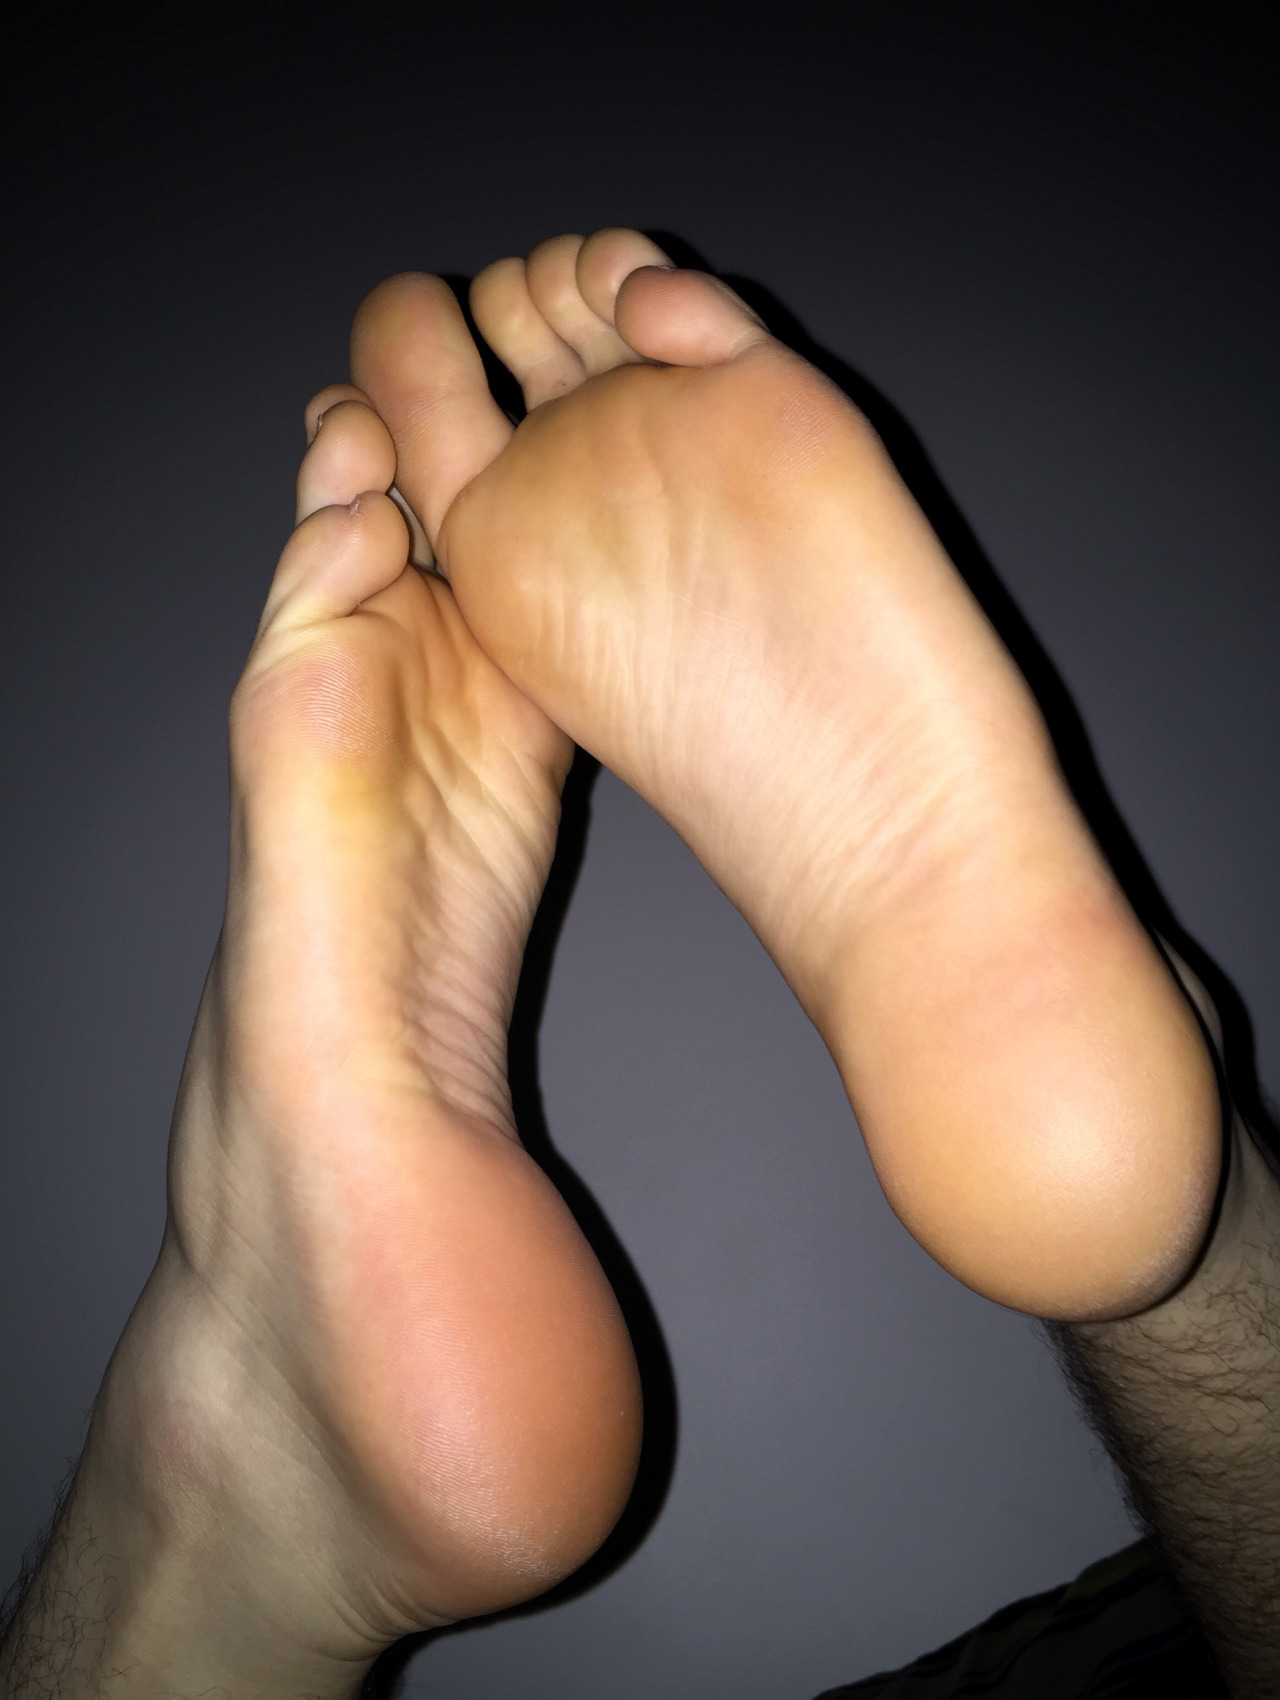 Foot view